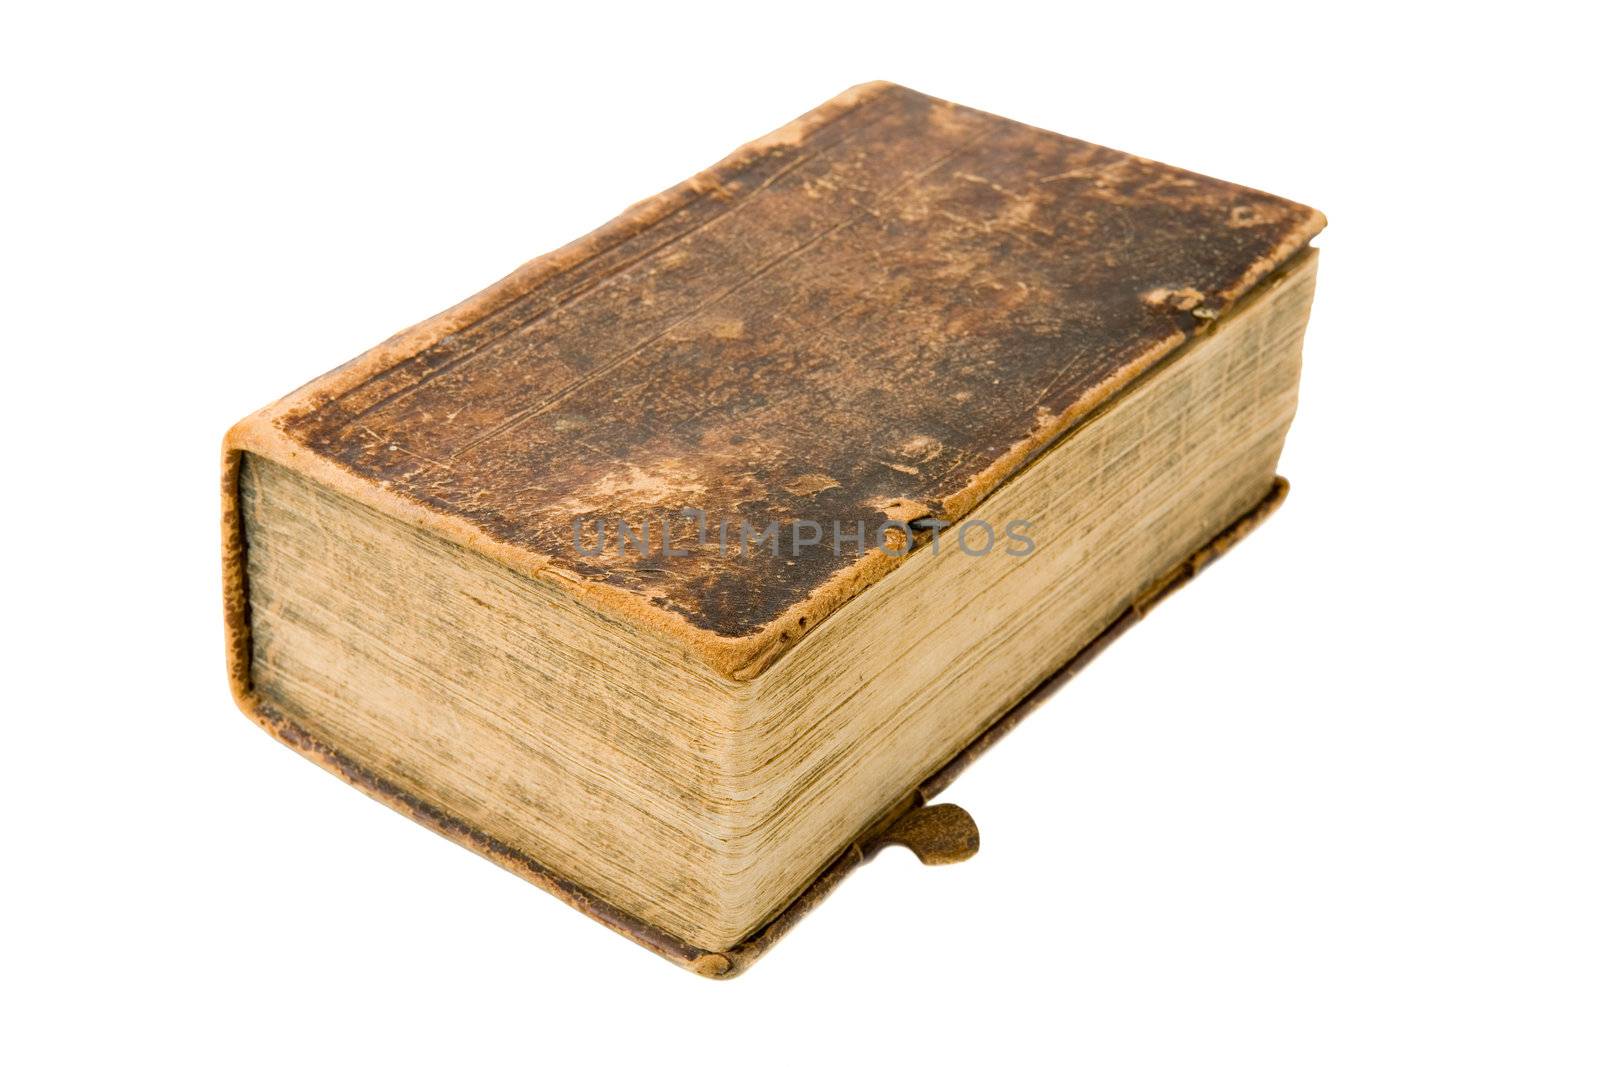 Old book isolated on a white background